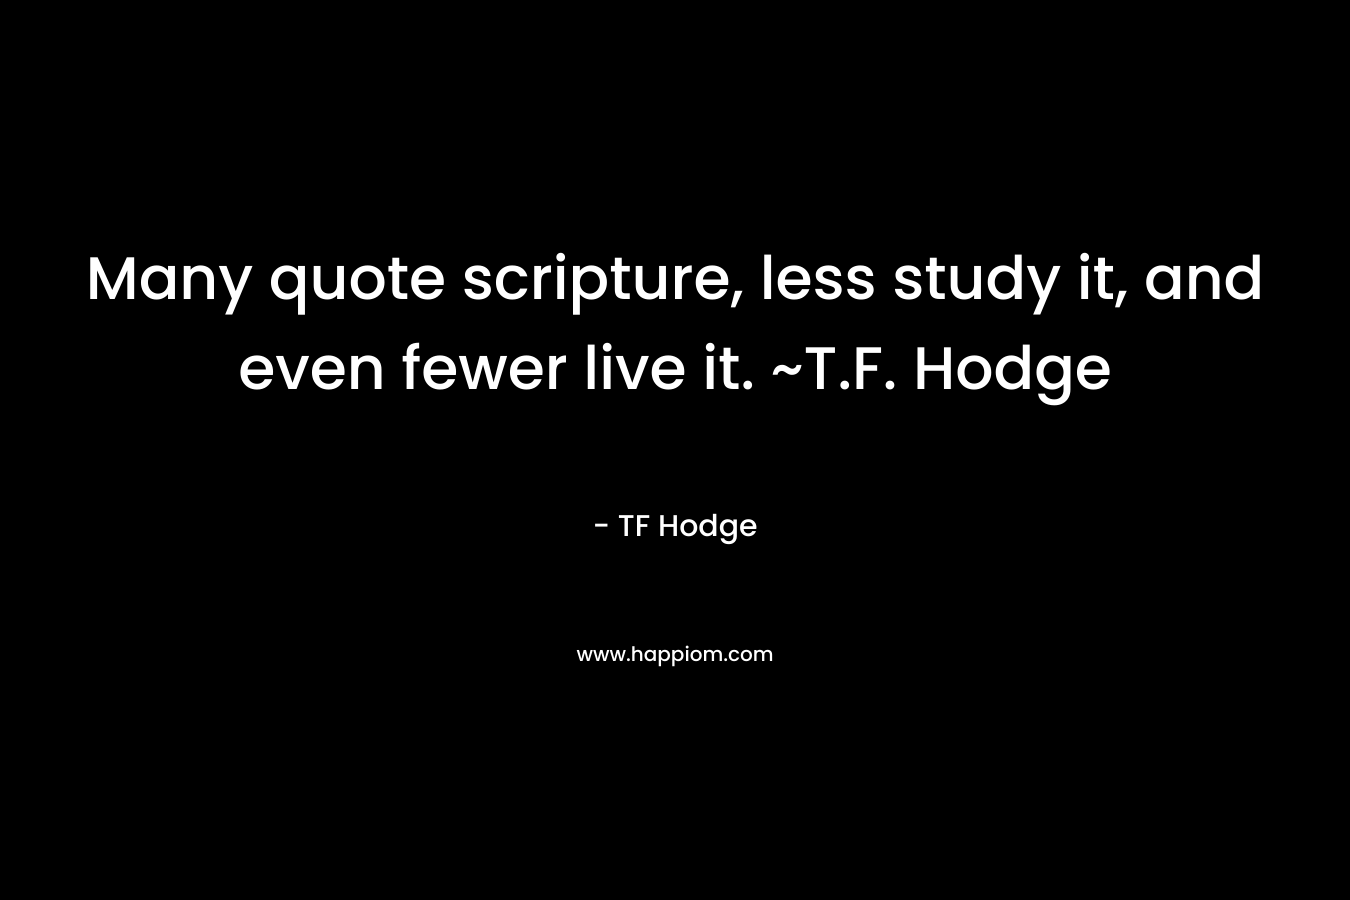 Many quote scripture, less study it, and even fewer live it. ~T.F. Hodge